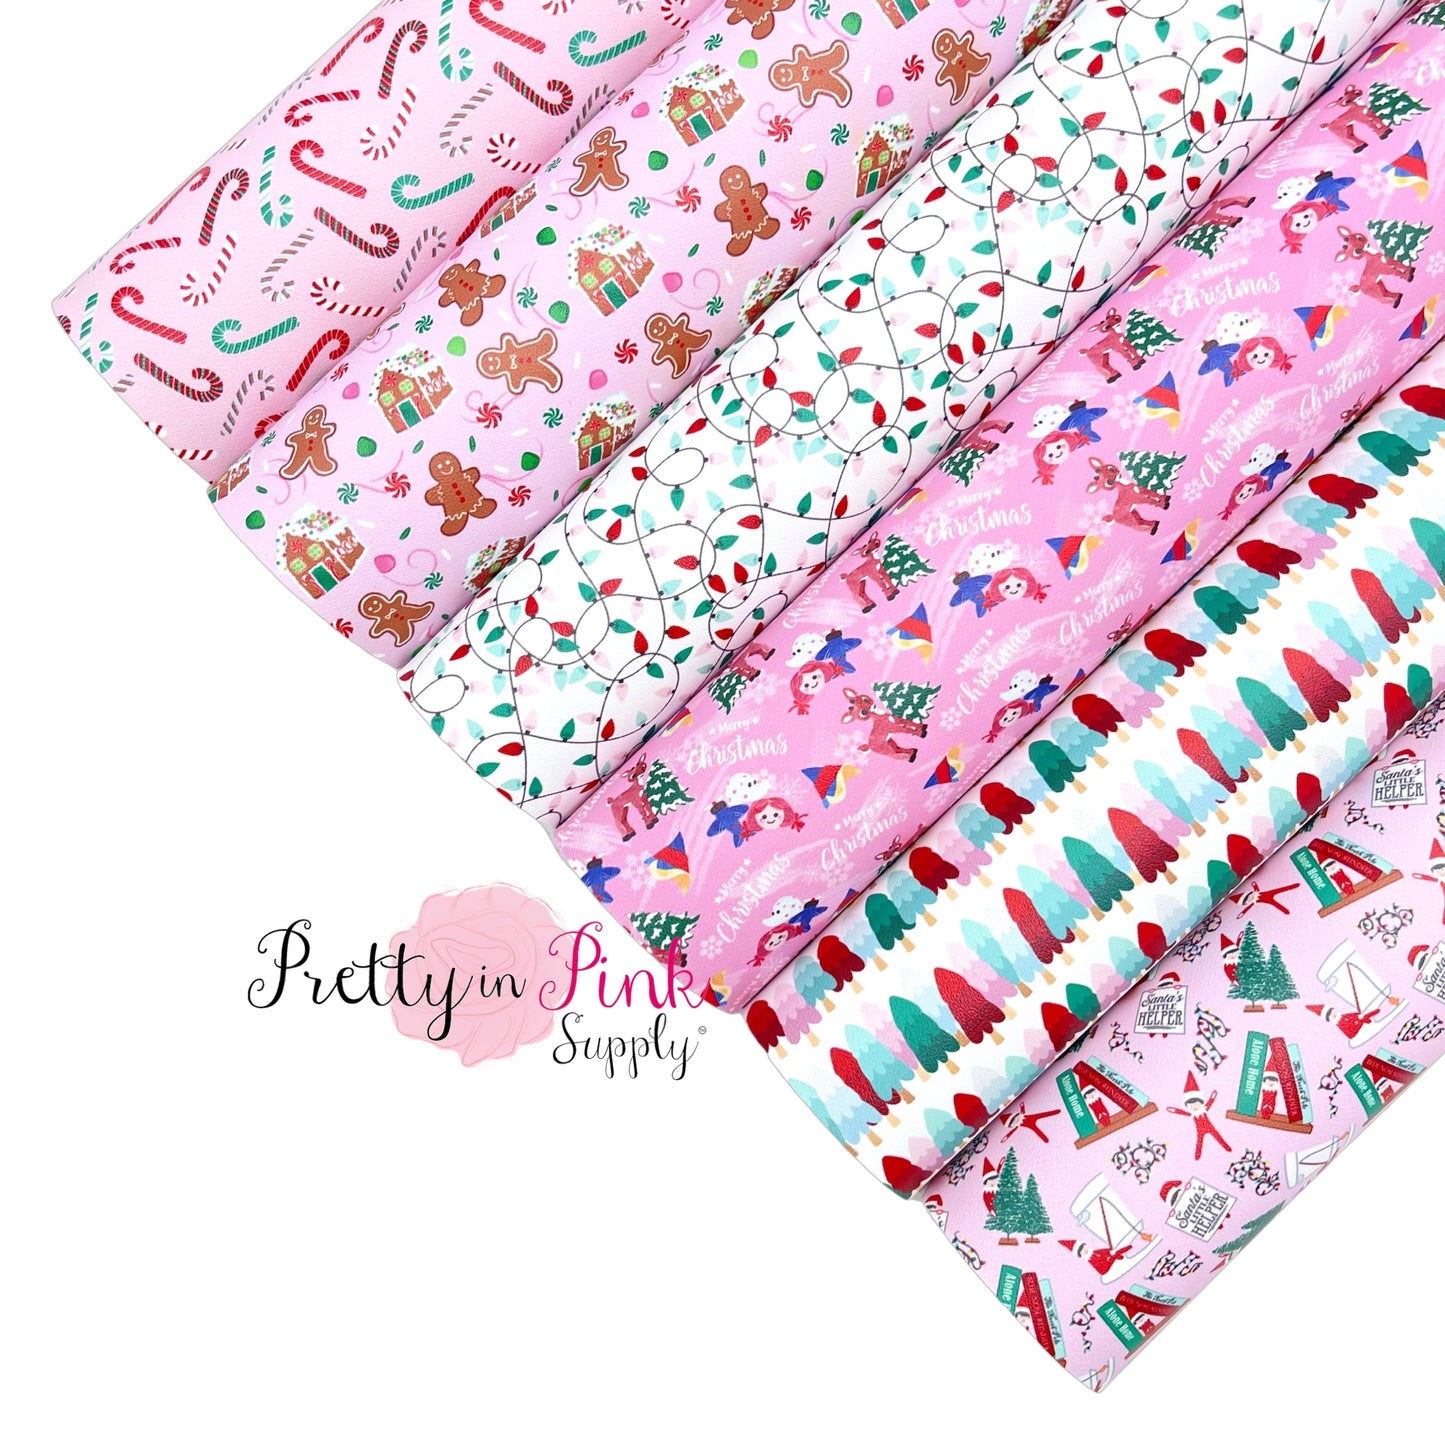 All available merry and bright Pink Christmas patterned faux leather sheets.